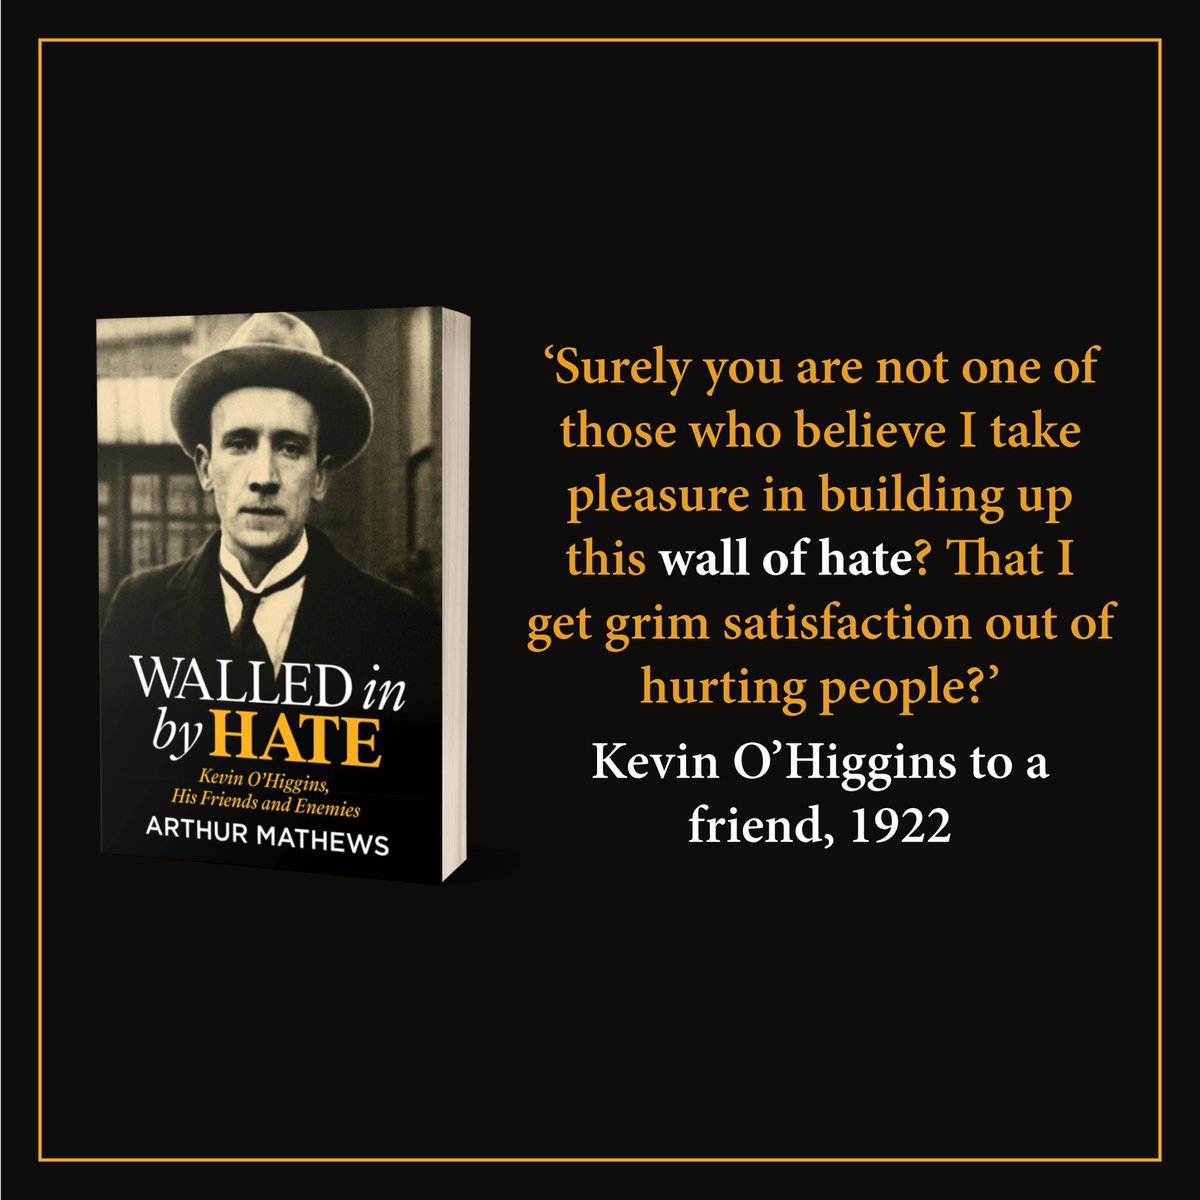 The tragic story of Kevin O’Higgins encapsulates the bitter divisions of a time in Irish history that continue to echo in today’s Ireland. Walled in by Hate by Arthur Mathews (co-creator of Father Ted) is out soon!